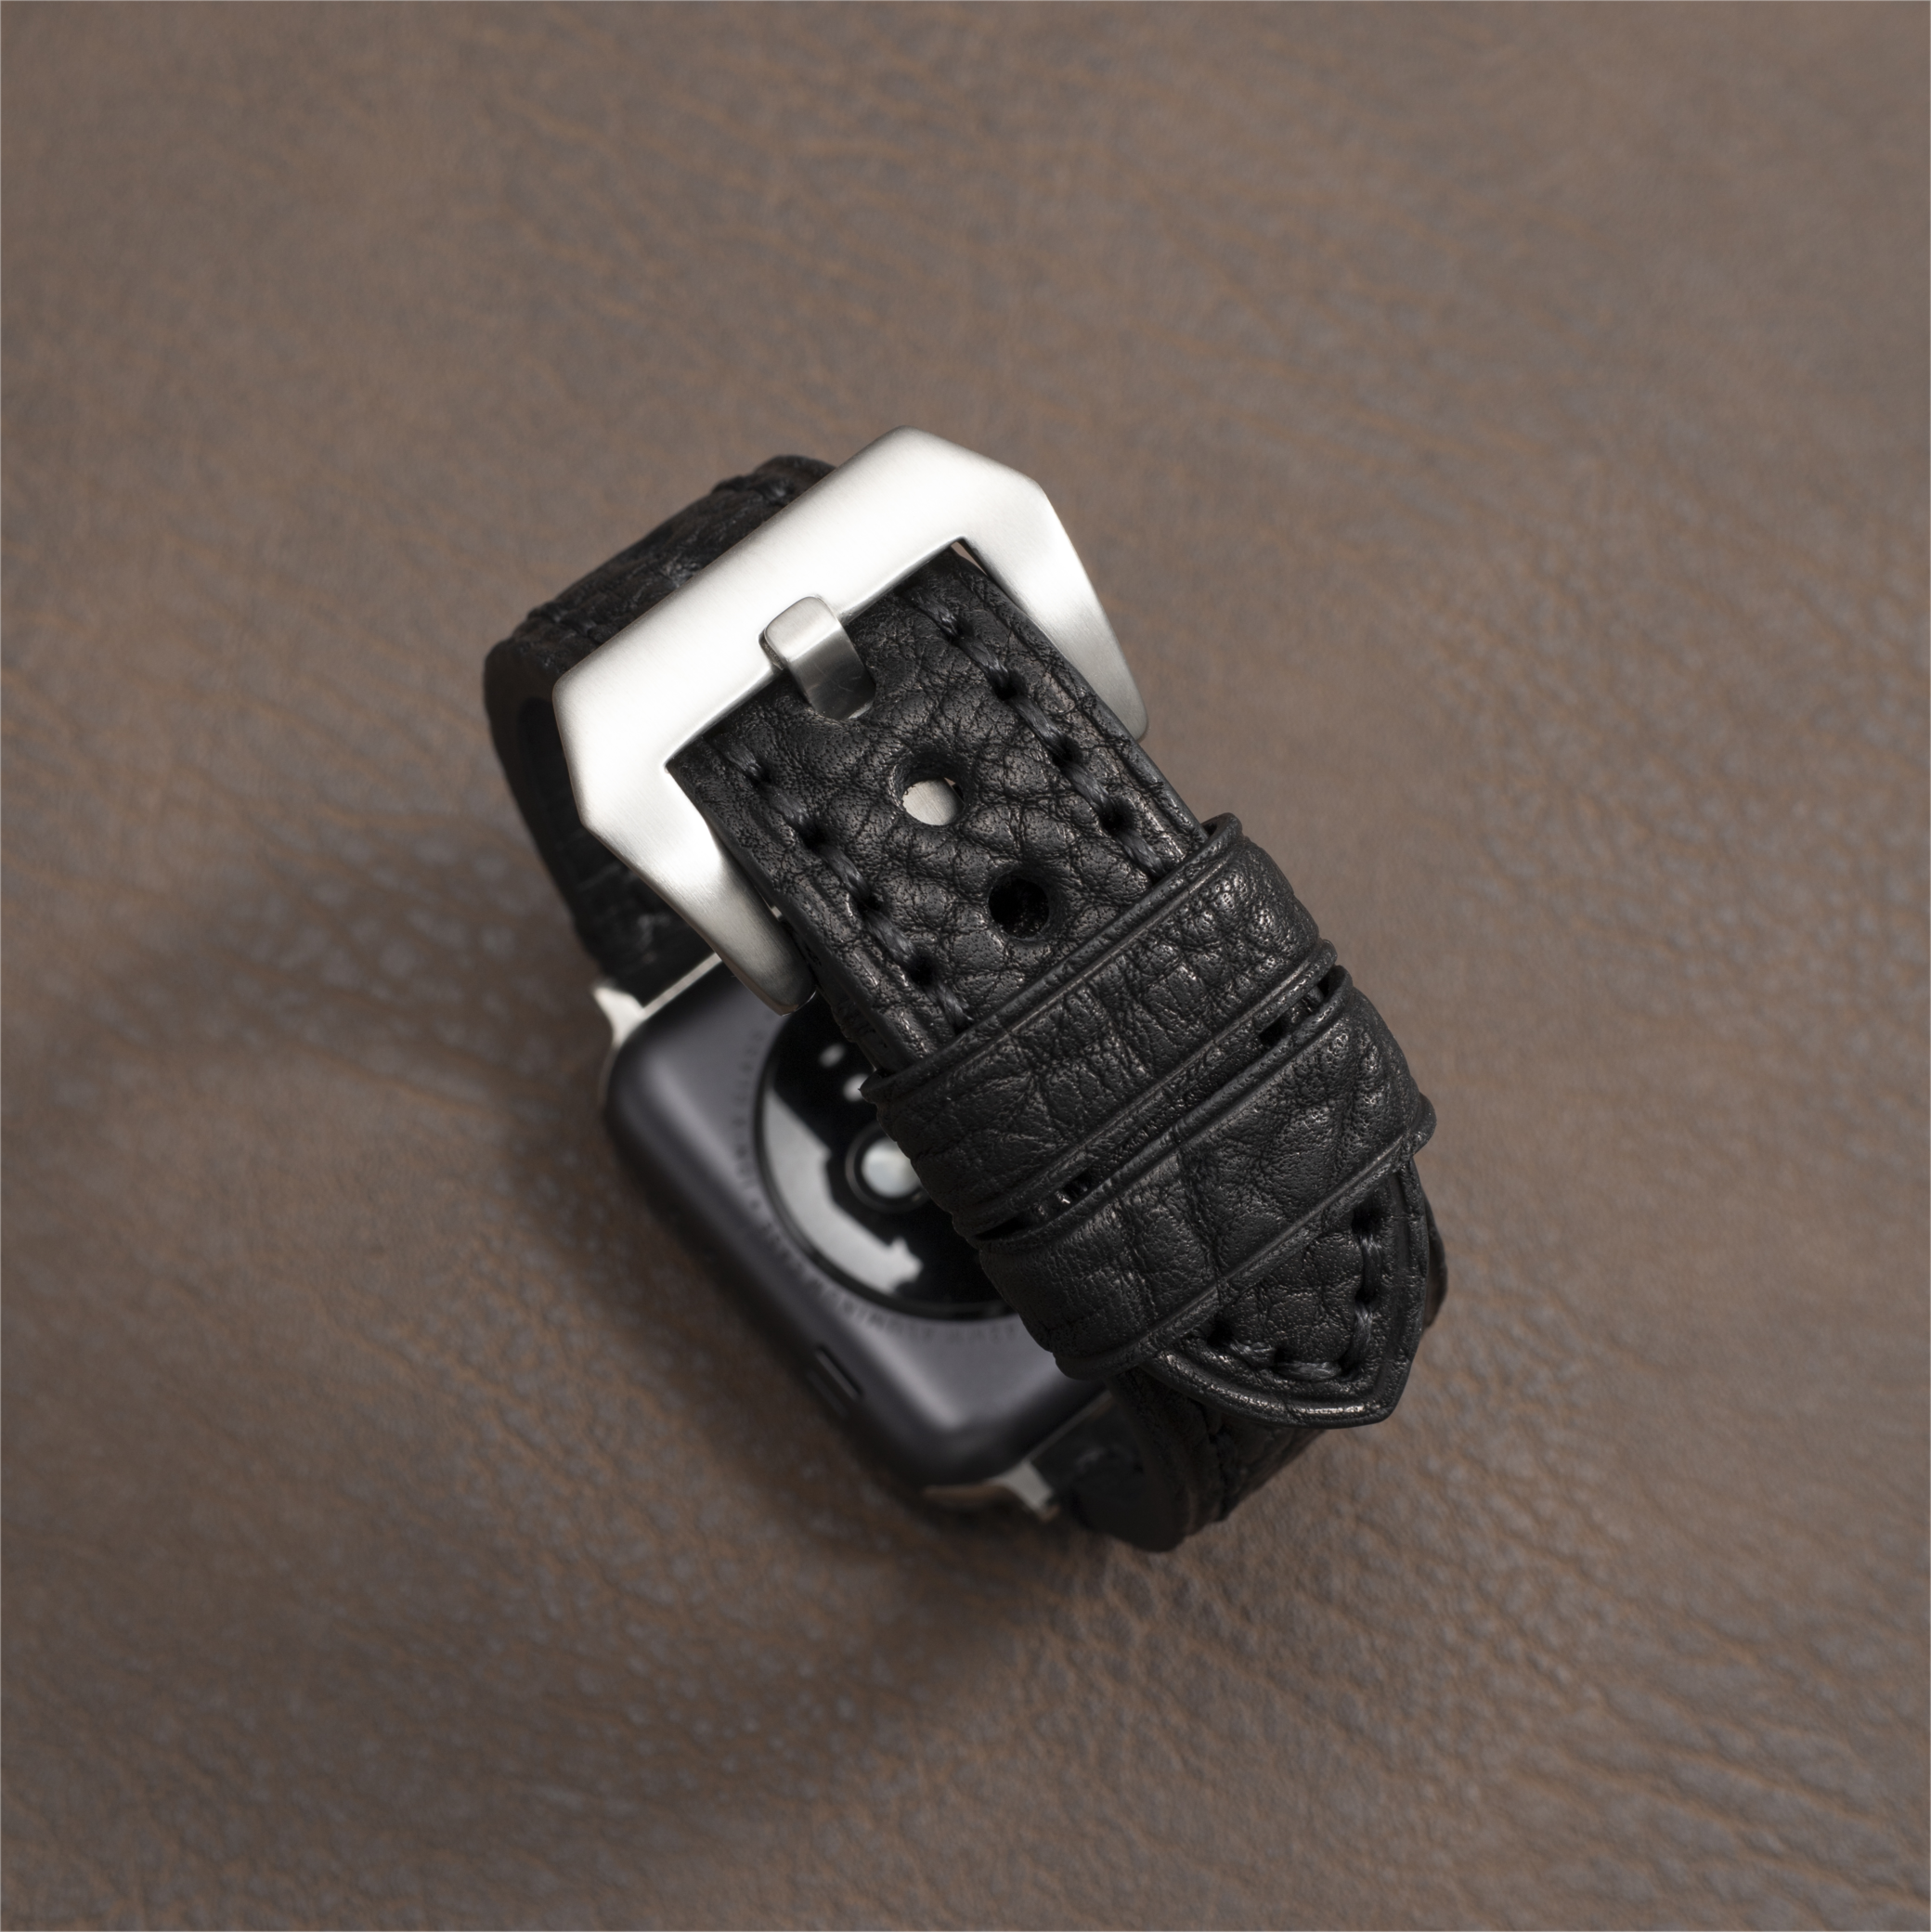 The Kingsman - Premium Leather Apple Watch Band